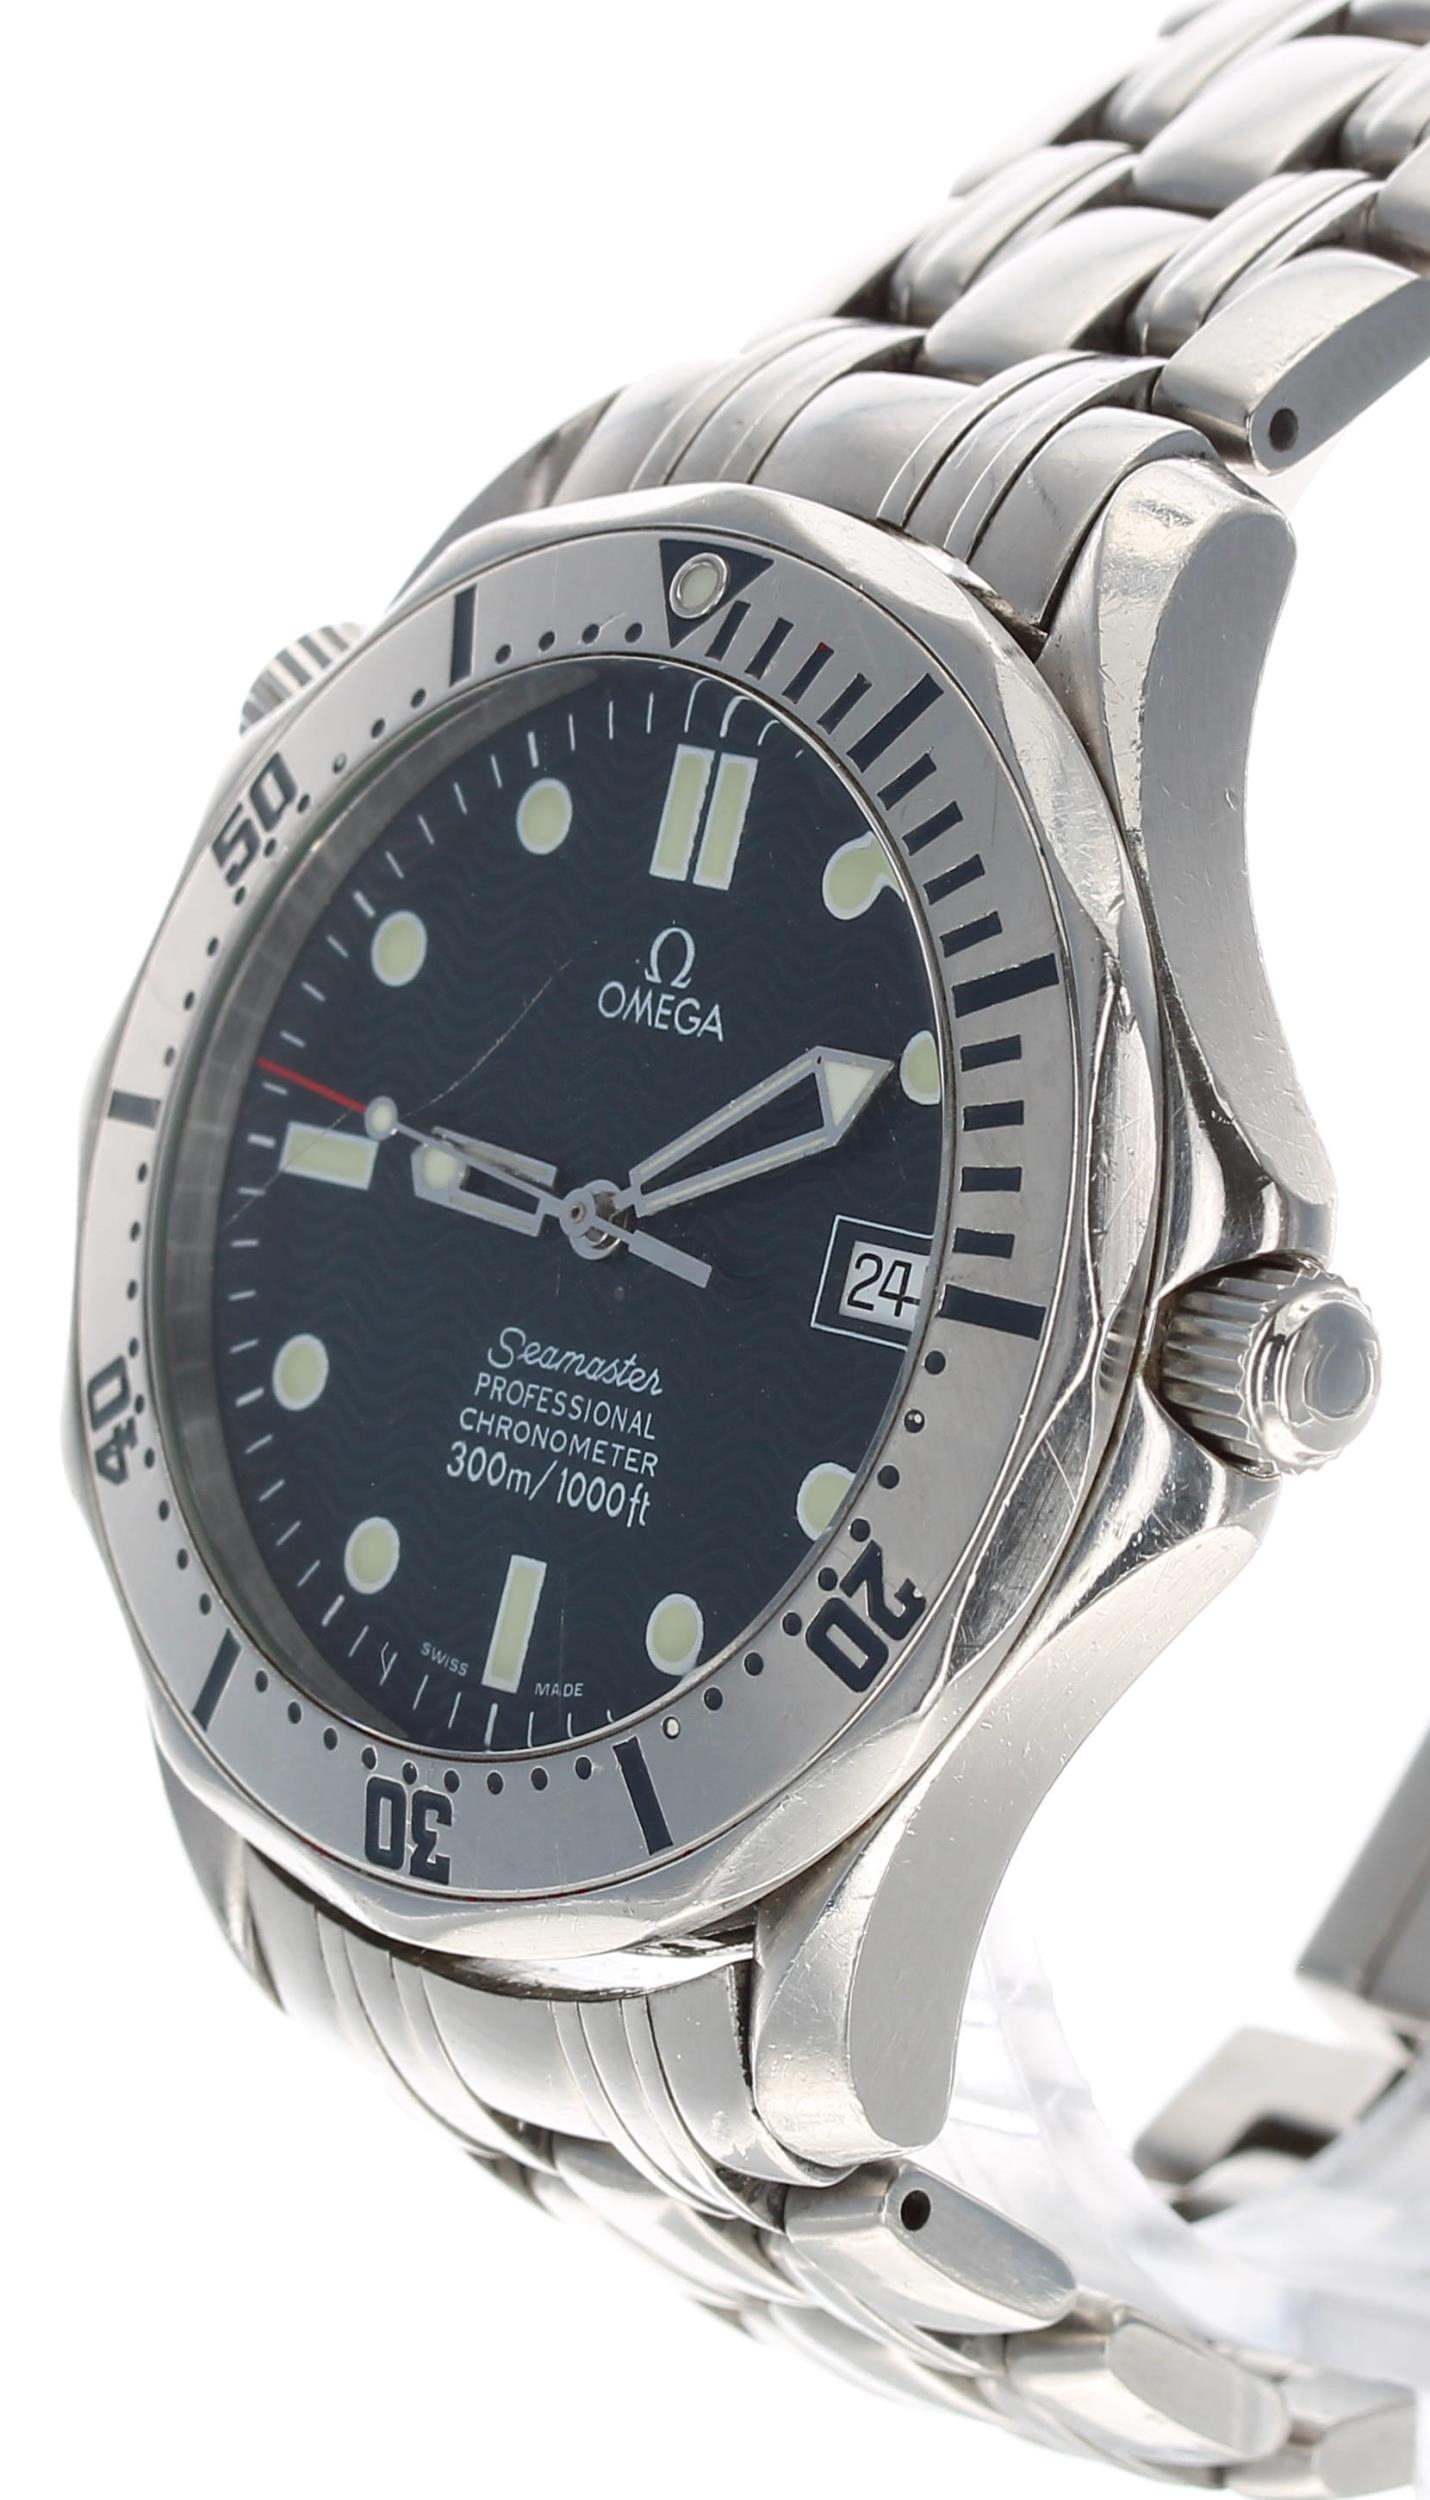 Omega Seamaster Professional Chronometer 300M automatic stainless steel gentleman's wristwatch, - Image 2 of 5